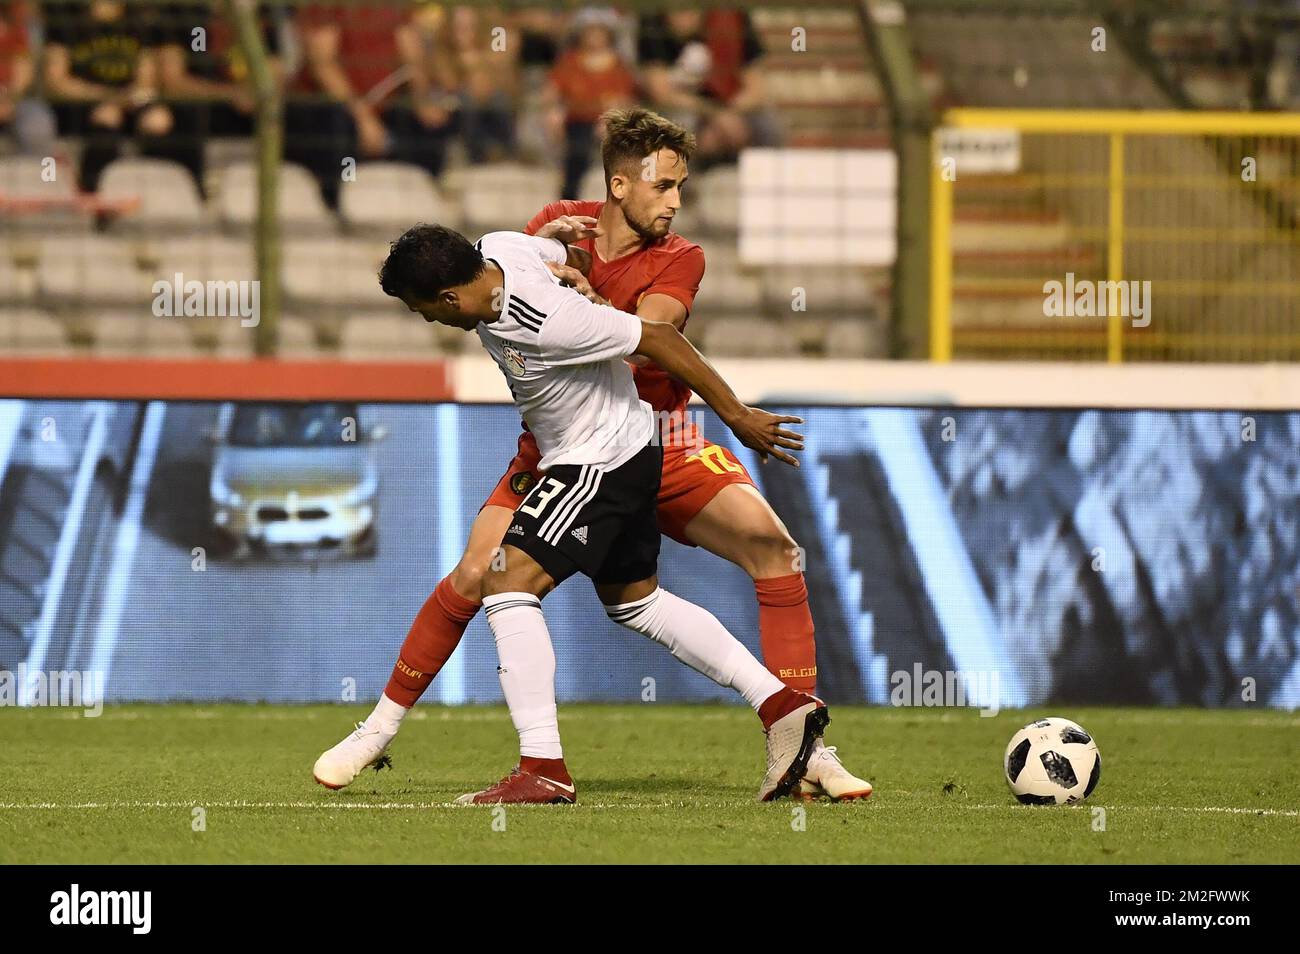 Egypt's Mohamed Abdel Shafy and Belgium's Adnan Januzaj fight for the ball during a friendly game between Belgium national team, The Red Devils and Egyptian national soccer team, Wednesday 06 June 2018, in Brussels. Both teams prepare the upcoming FIFA World Cup 2018 in Russia. BELGA PHOTO DIRK WAEM  Stock Photo